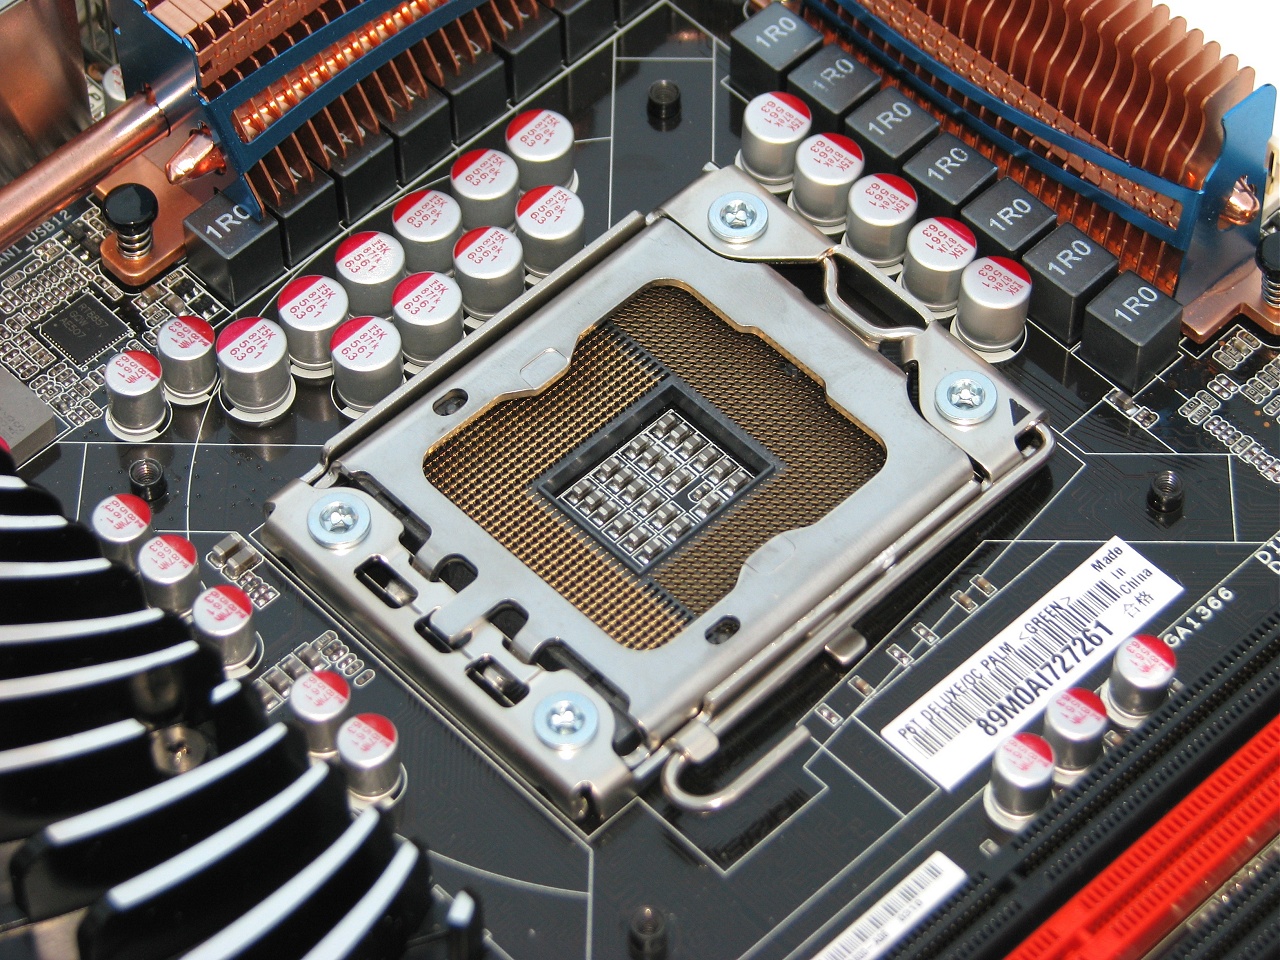 Asus P6T Deluxe Intel X58 motherboard review Photo Gallery - TechSpot